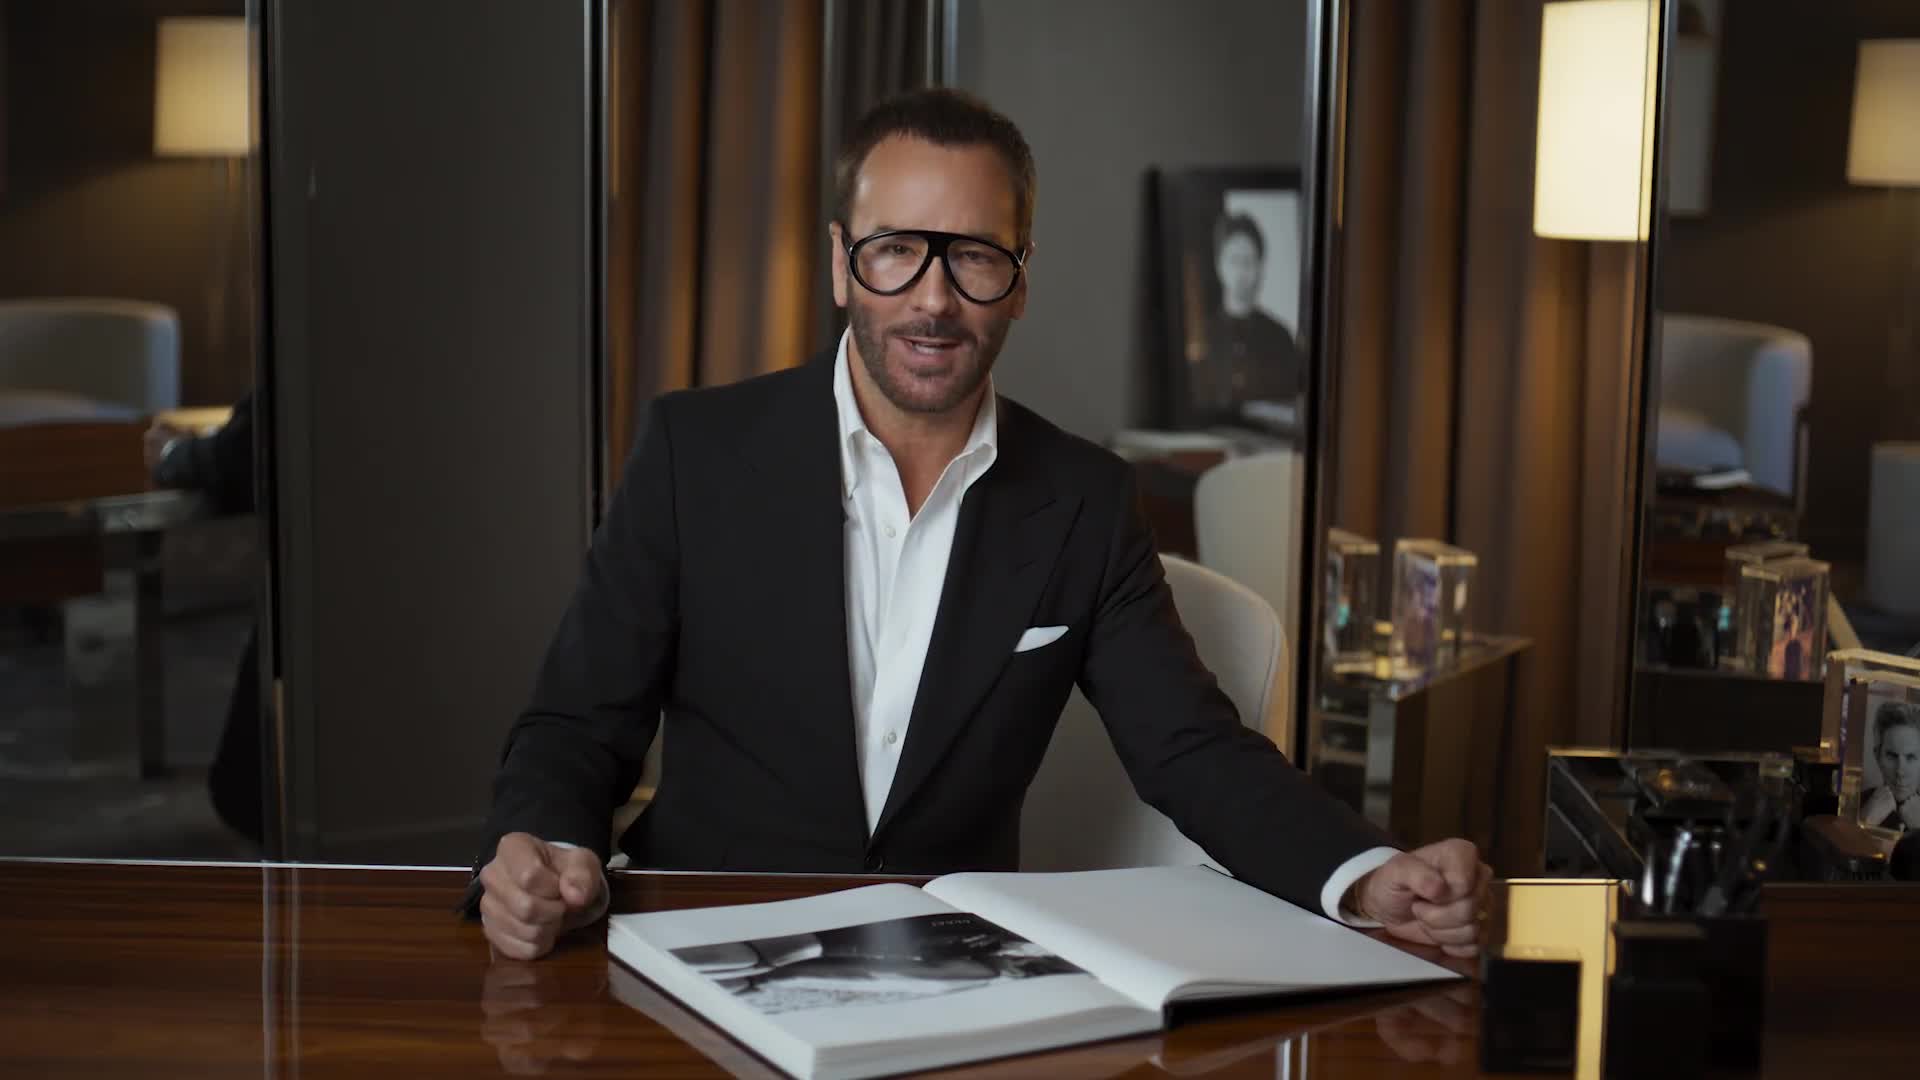 Watch Life in Looks with Tom Ford | Life in Looks | Vogue